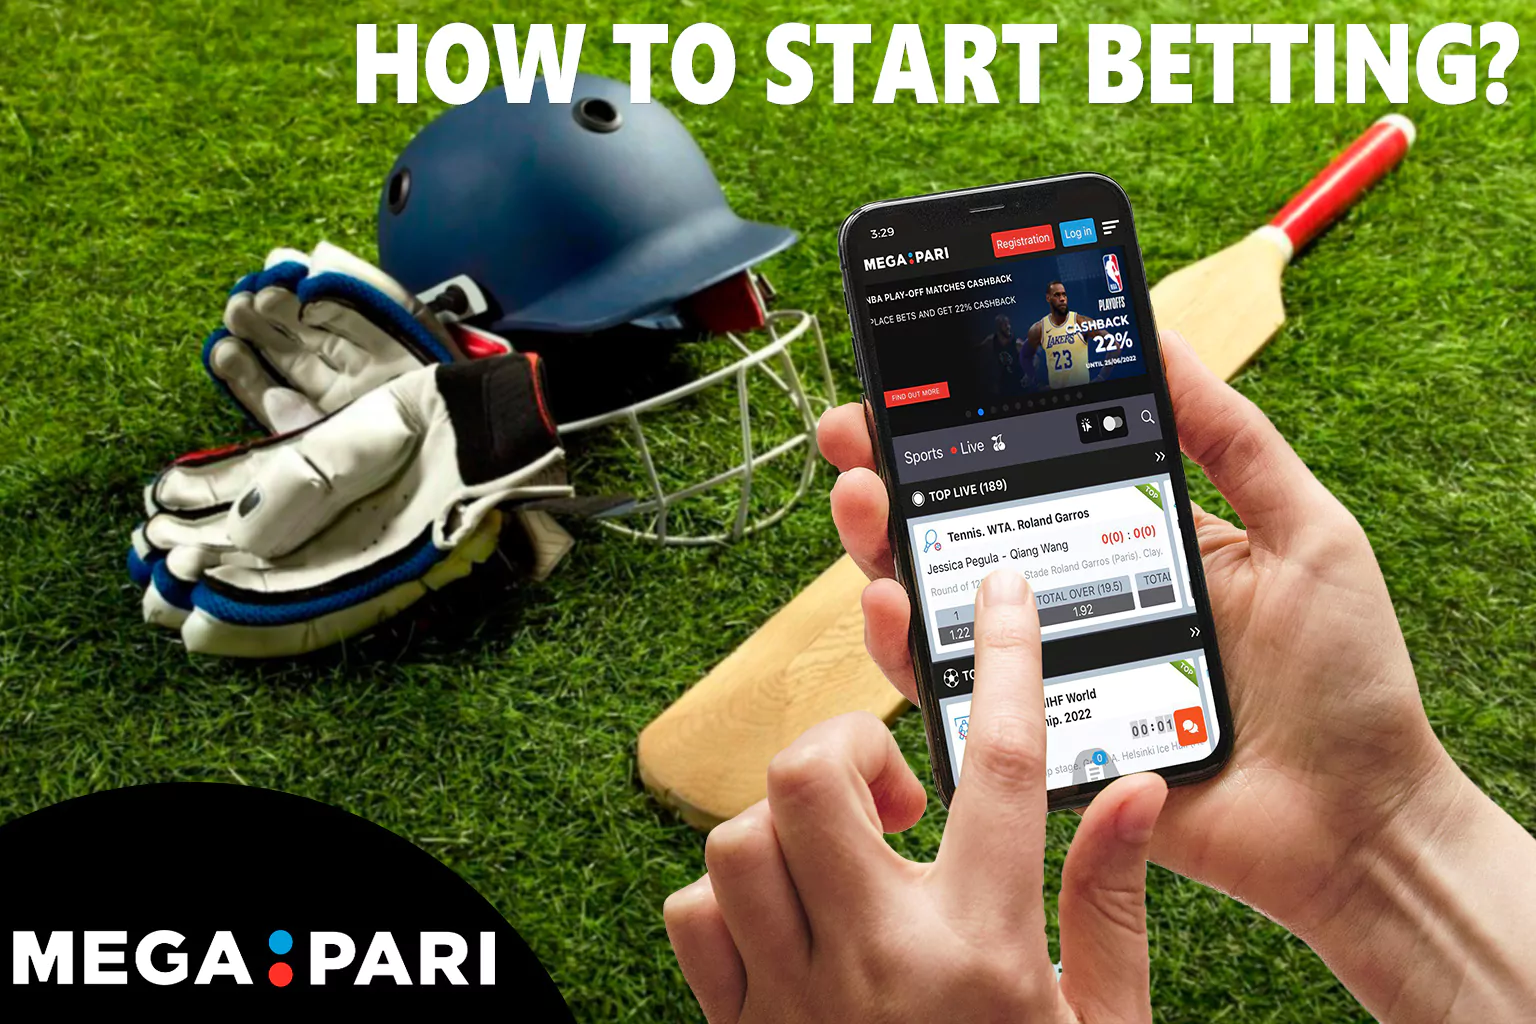 Start betting with Megapari Bangladash, create an account in just a few easy steps.